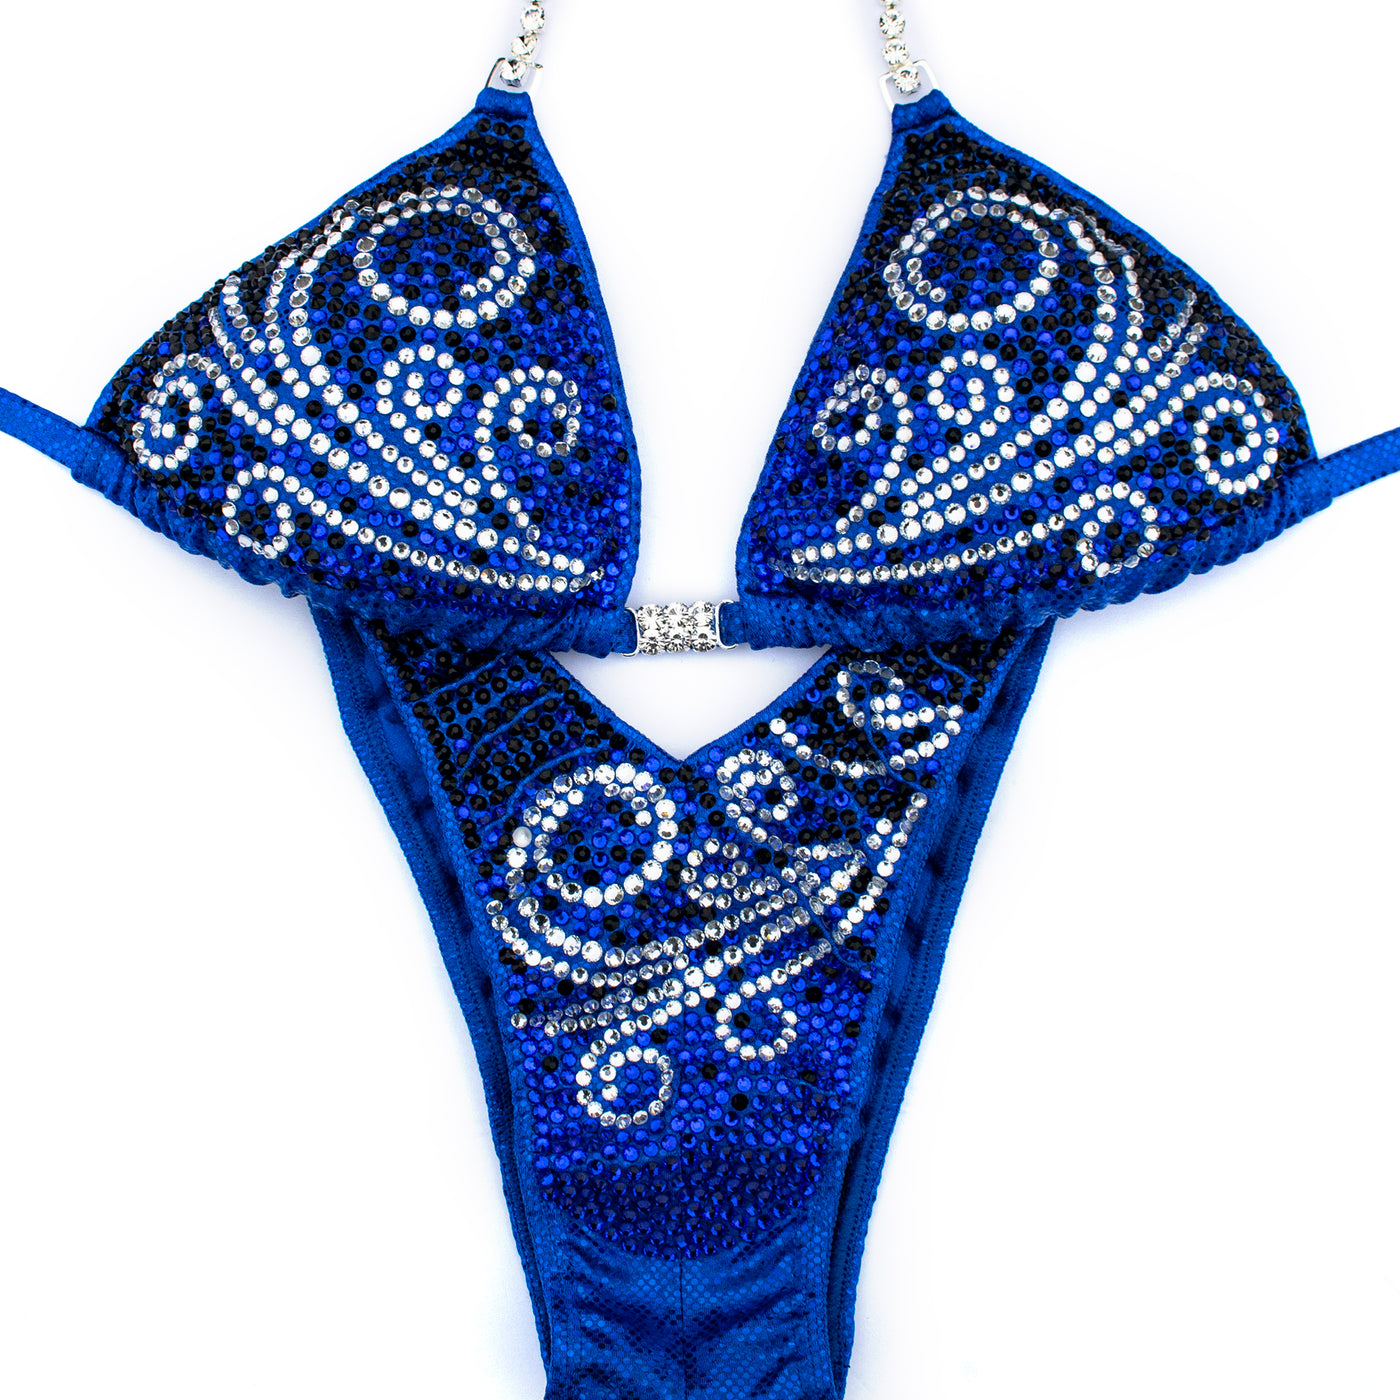 Patty Figure/WPD Competition Suit | OMG Bikinis